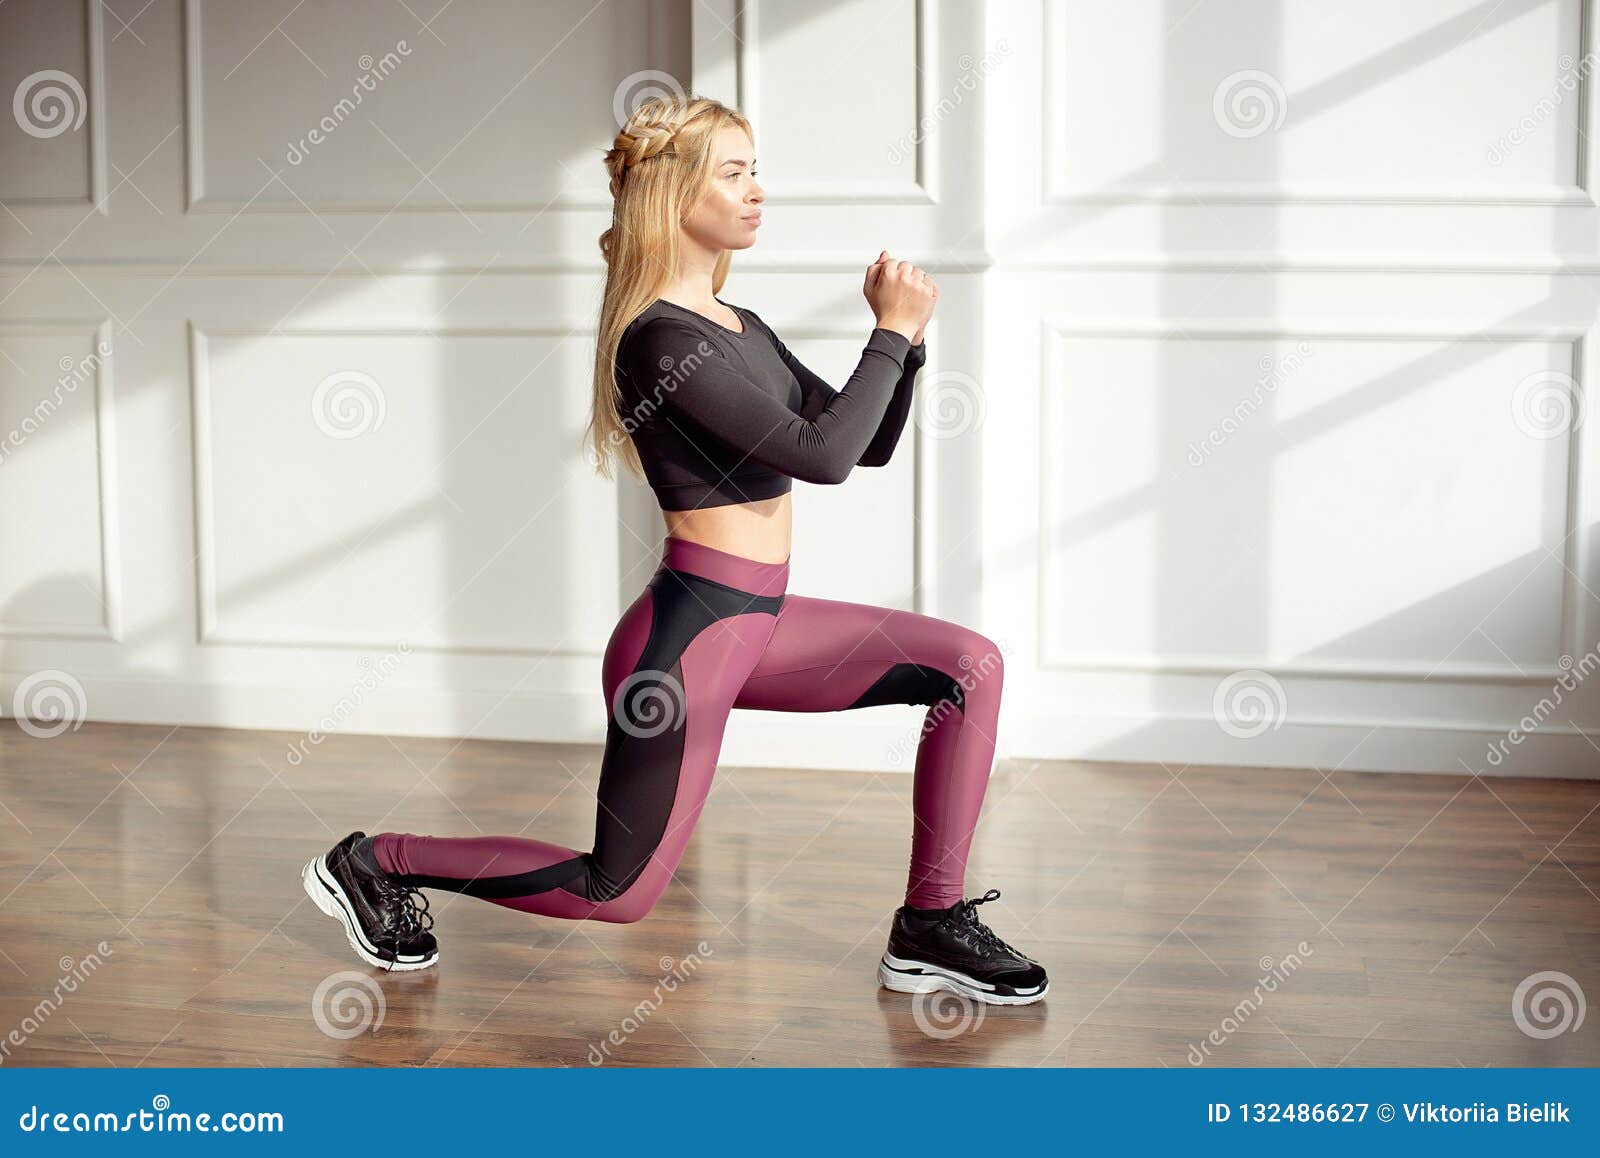 Young Slim Woman with an Athletic Body Long Blonde Hair, Wearing a